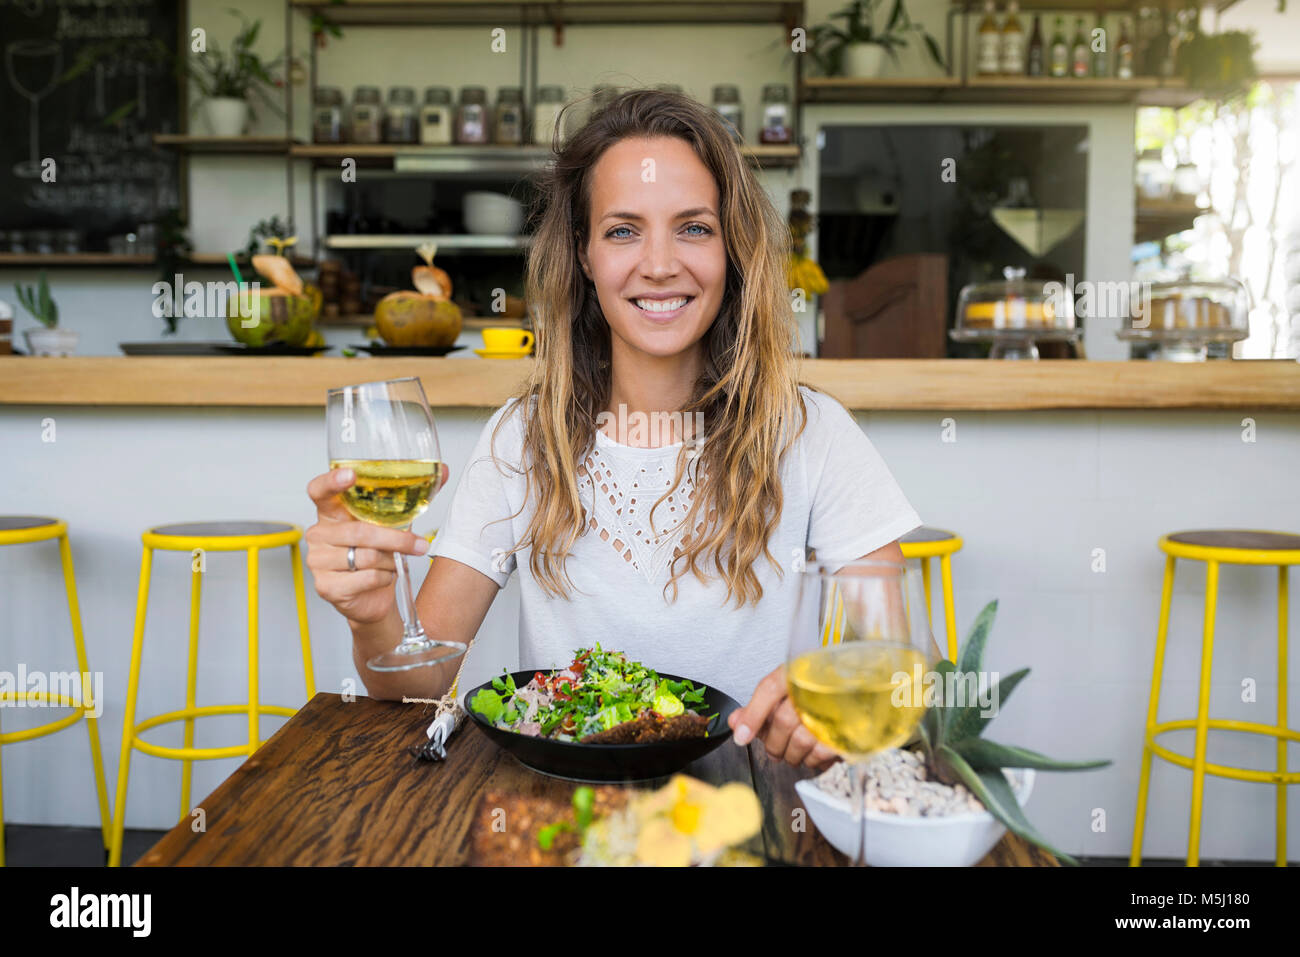 Portrait of smiling woman holding glass of wine in a cafe Stock Photo